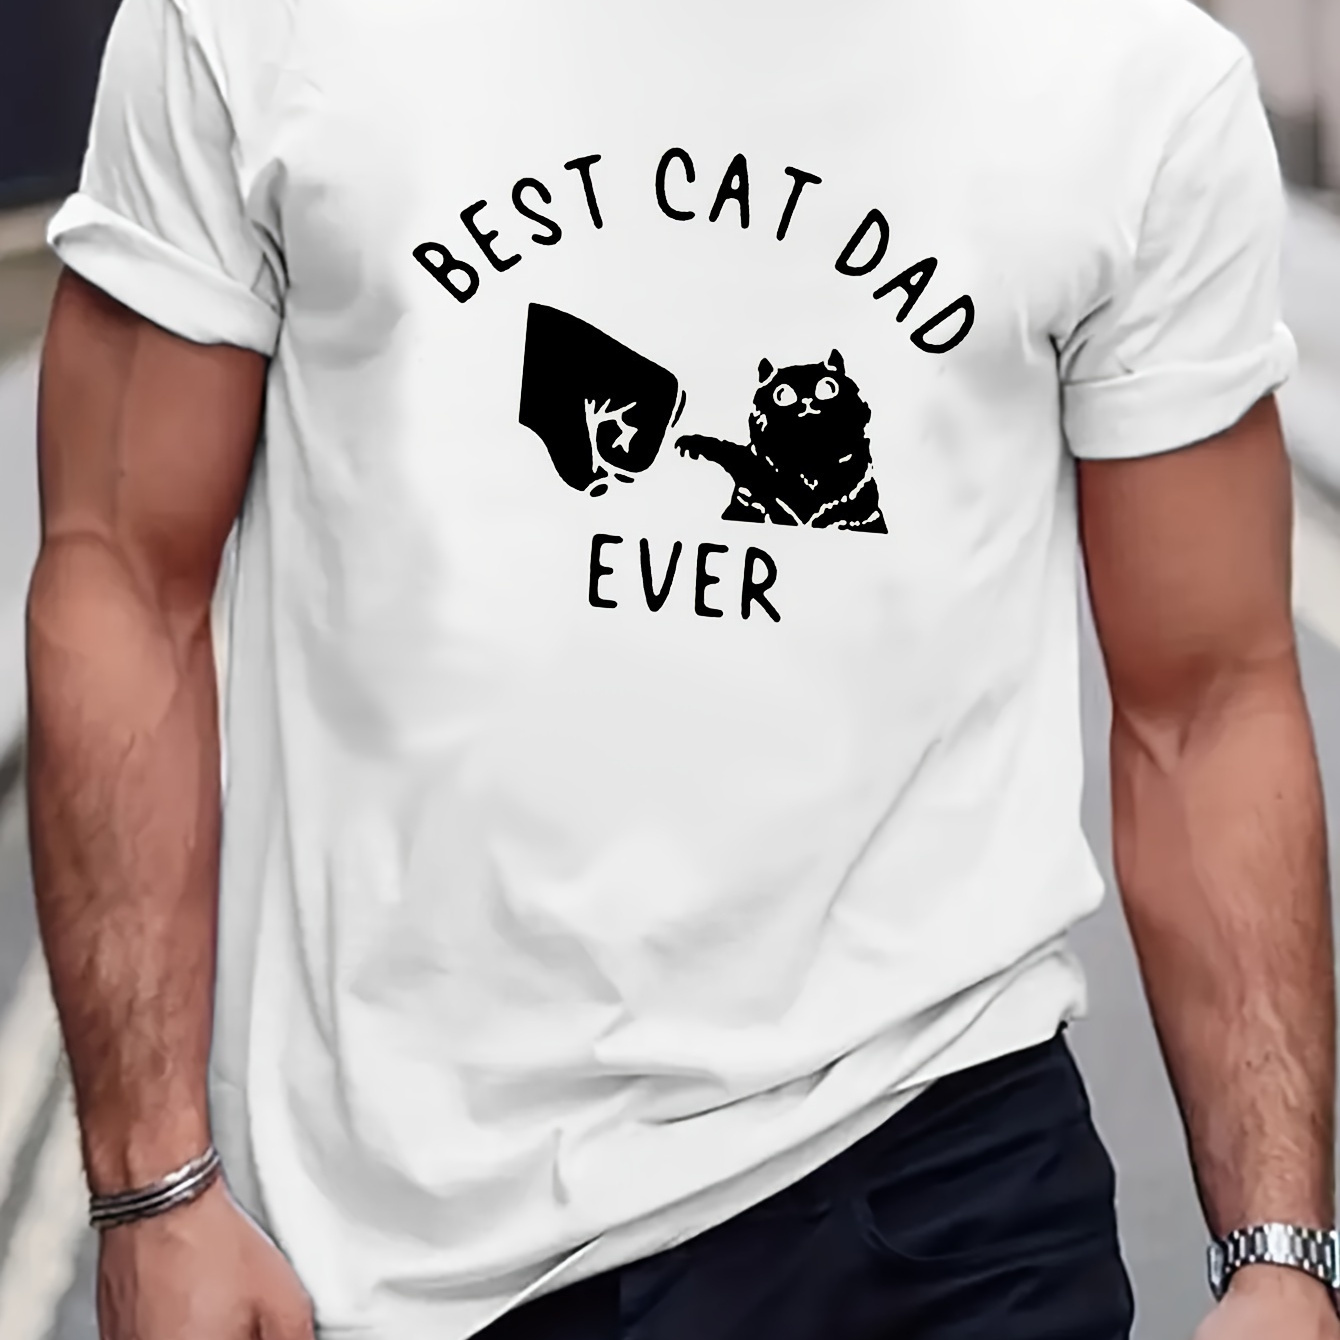 

Best Cat Dad Ever Print Men's Trendy Short Sleeve T-shirts, Comfy Casual Breathable Tops For Men's Fitness Training, Jogging, Outdoor Activities